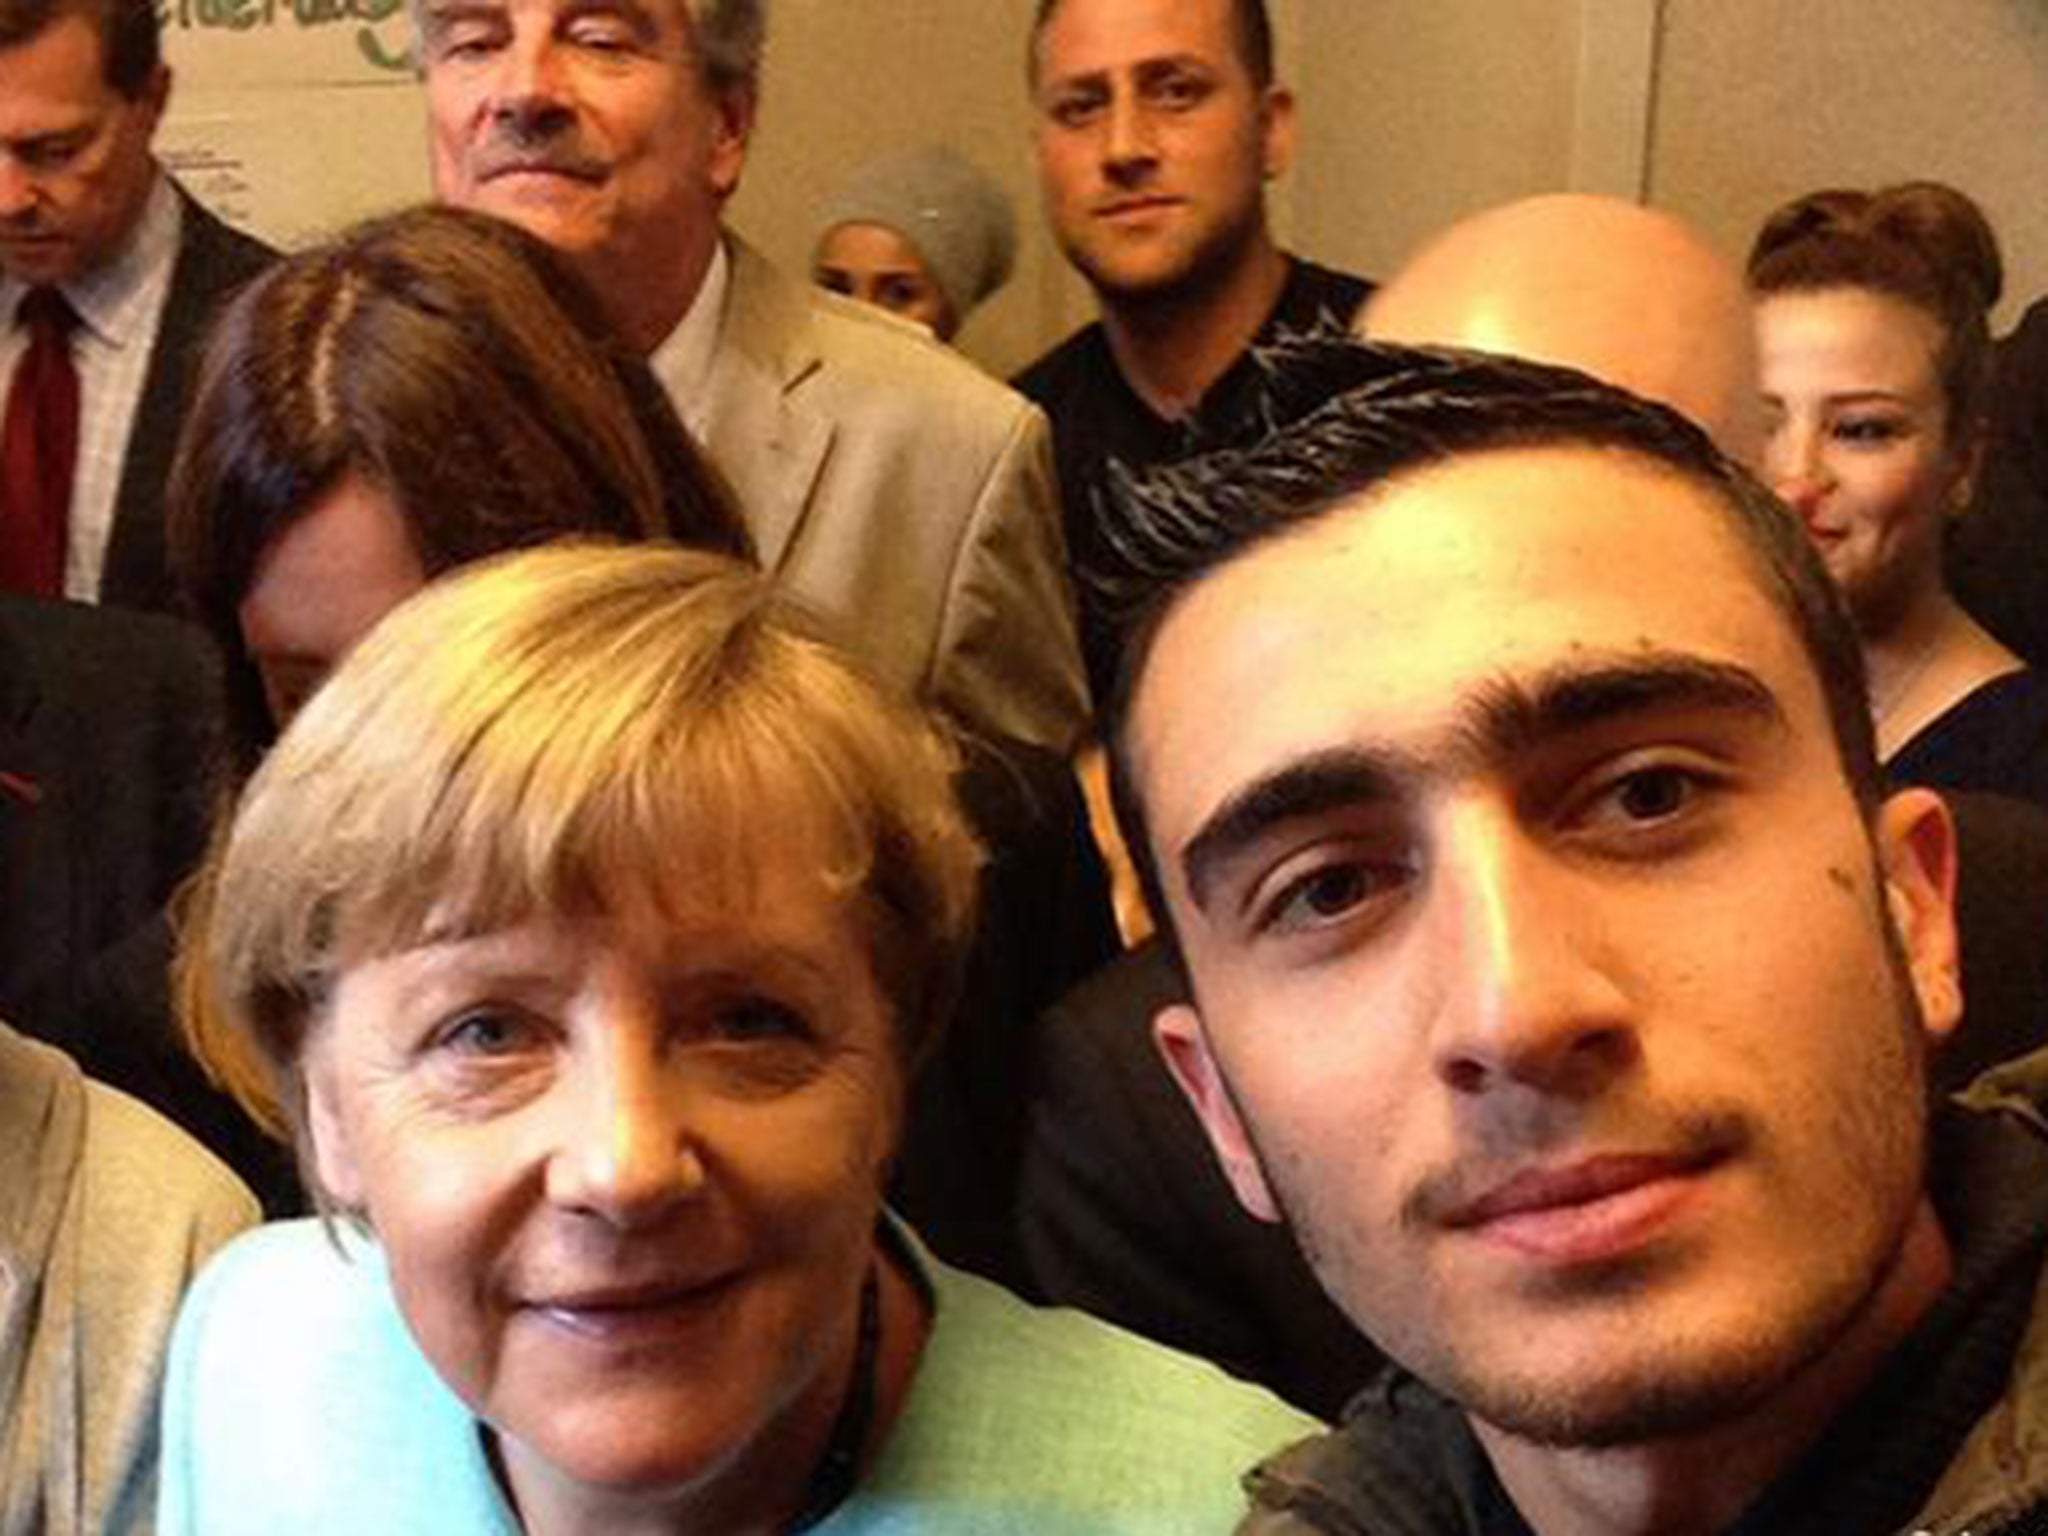 Anas Modamani took the photo when Angela Merkel visited the refugee camp in which he was living in Berlin. To his horror, it went viral this week after it was wrongly claimed that he was one of the men behind the Brussels Airport bomb